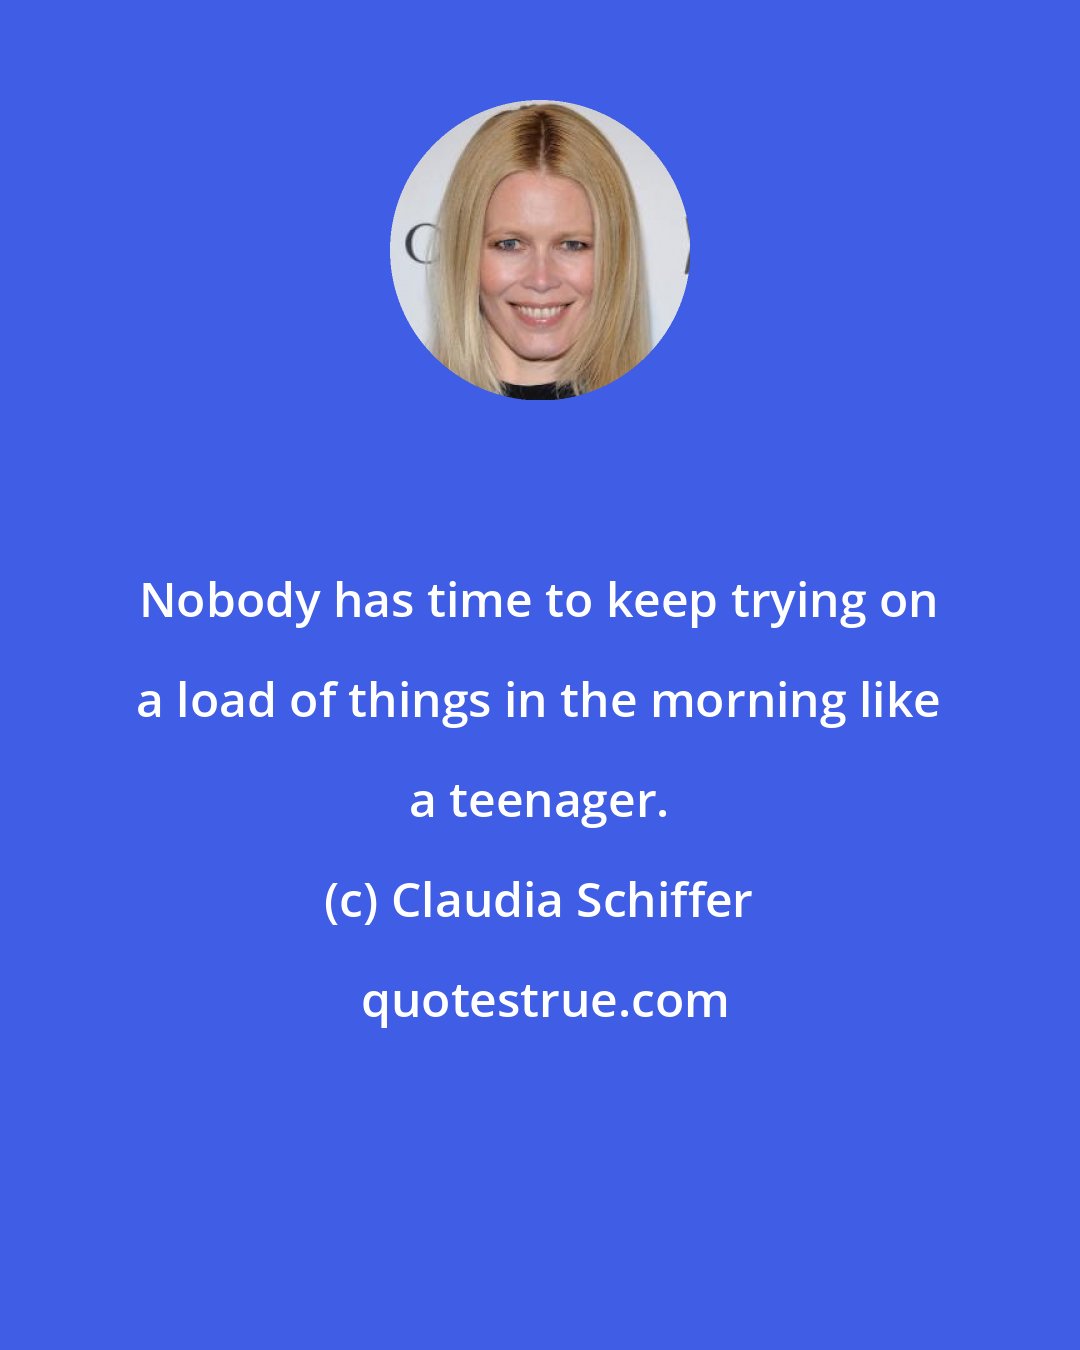 Claudia Schiffer: Nobody has time to keep trying on a load of things in the morning like a teenager.